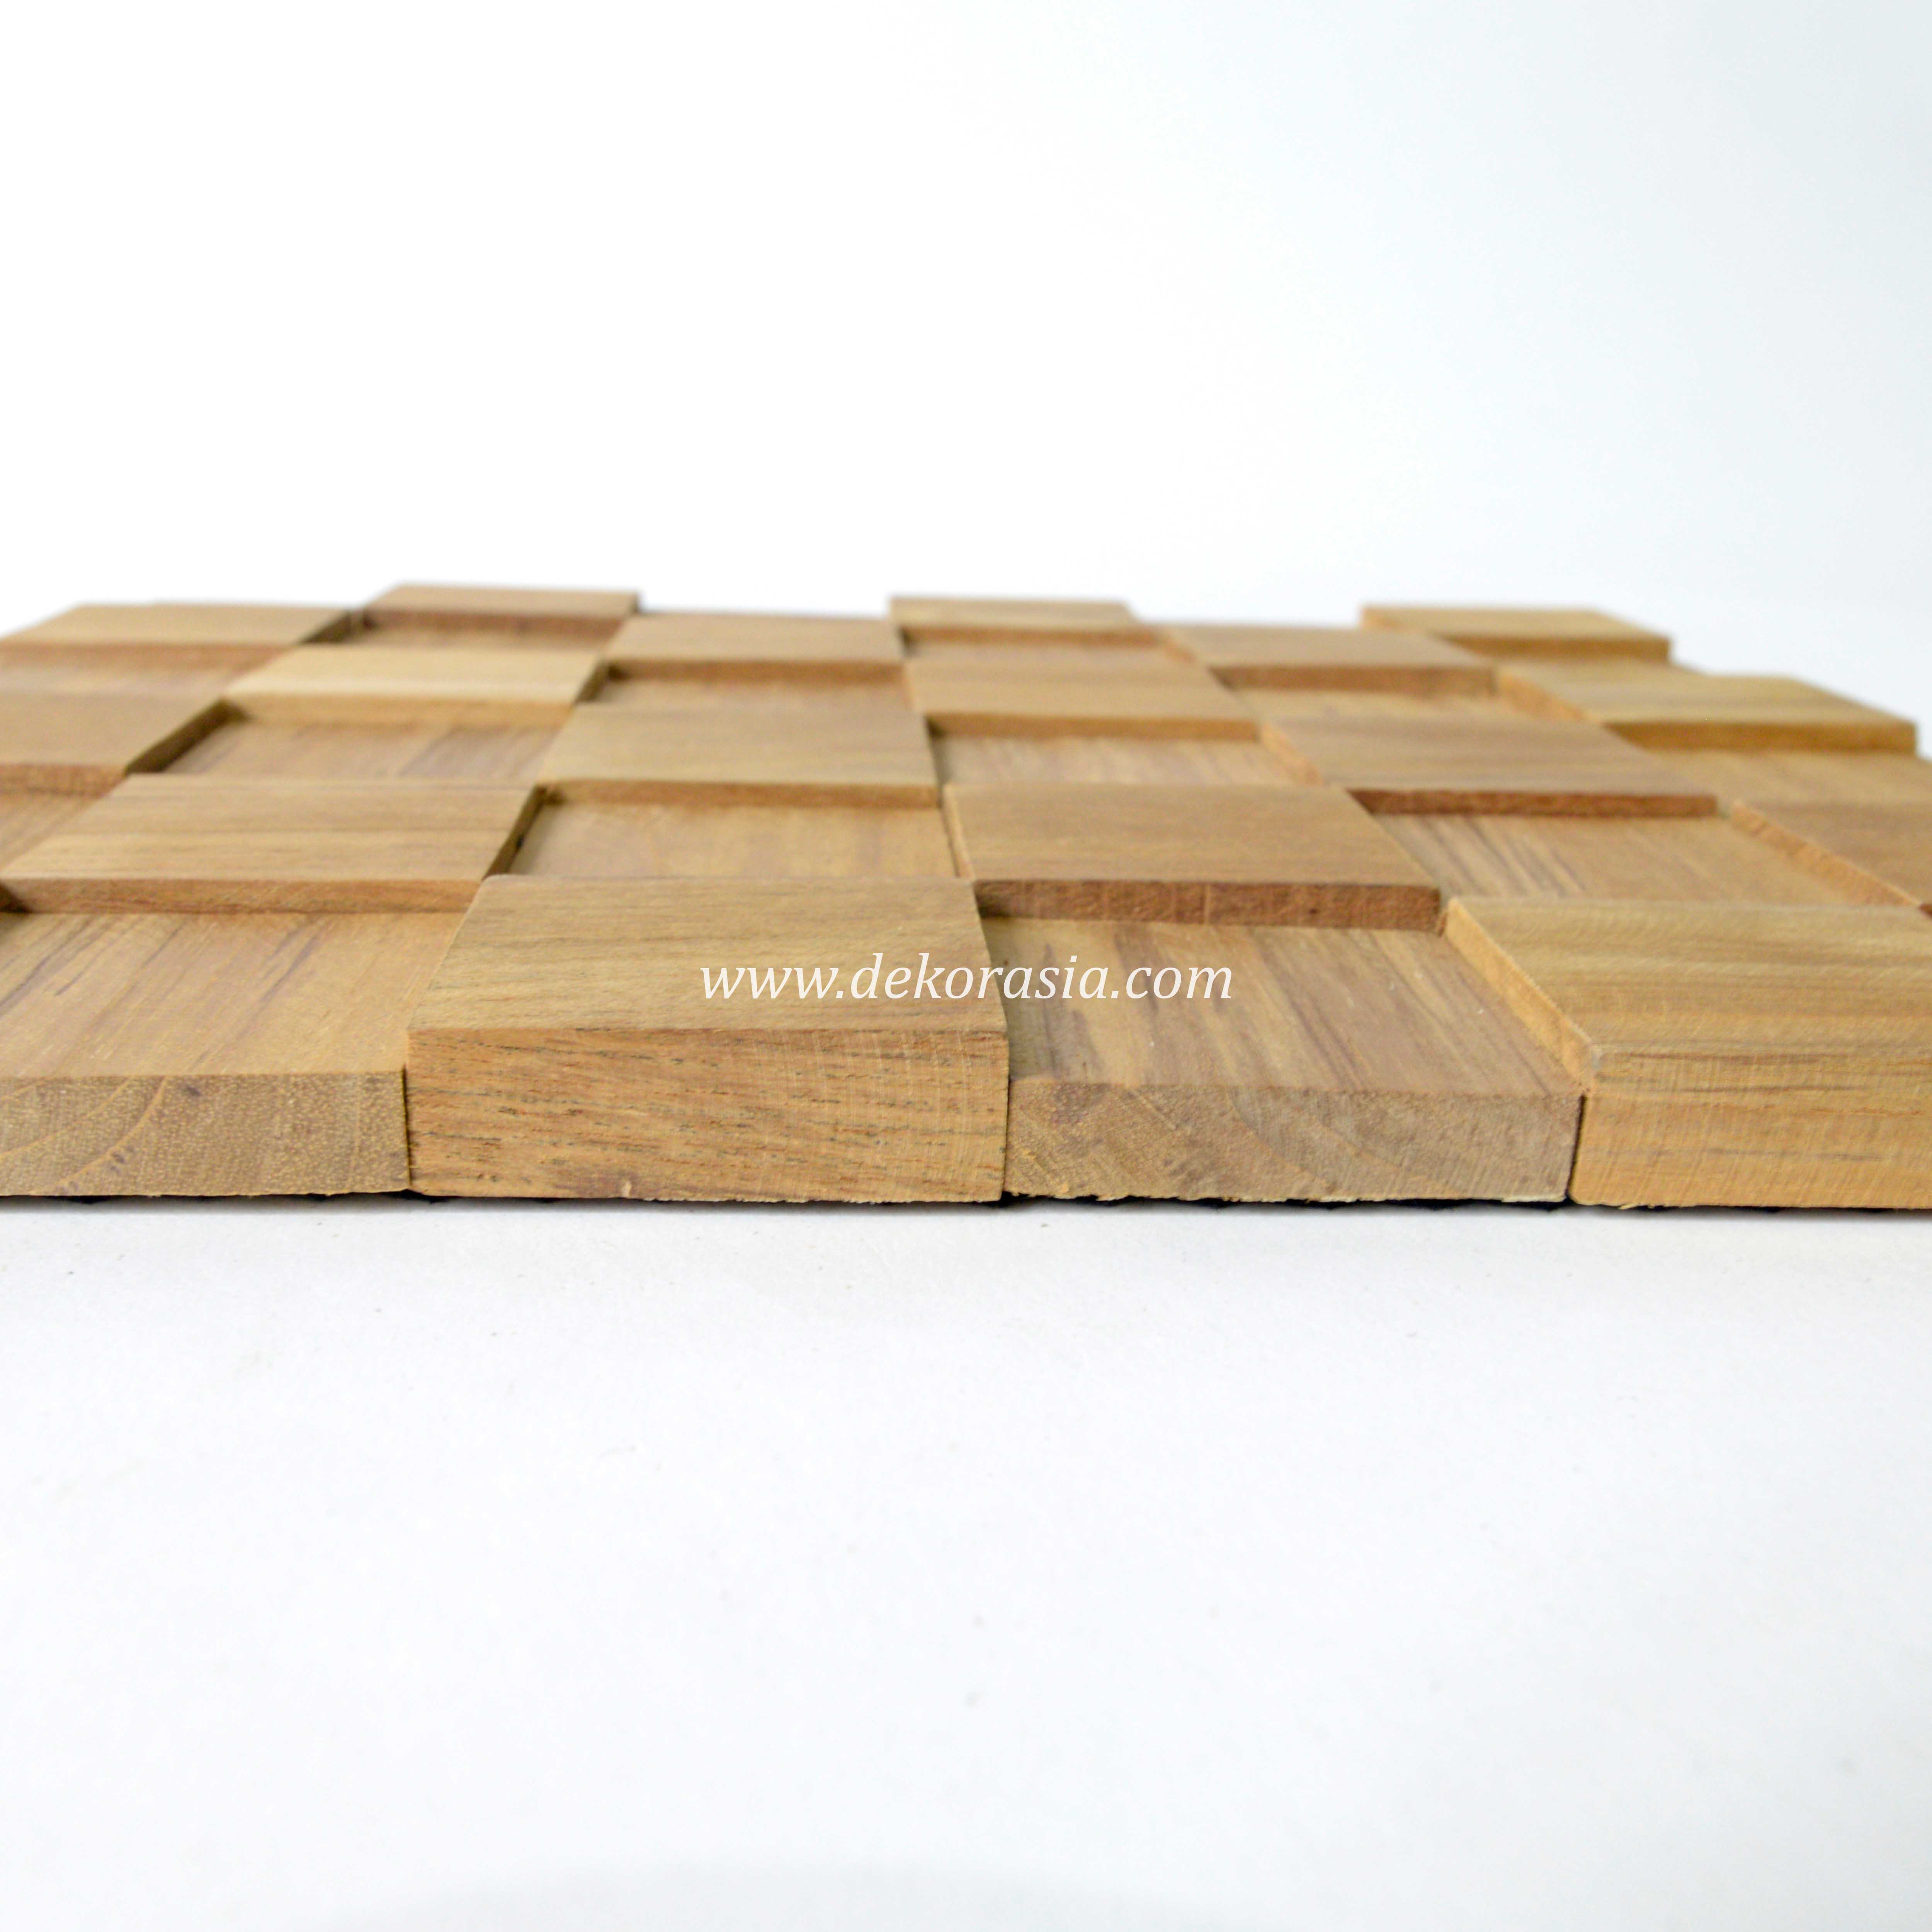 Top Quality Cube Teak for Interior/Exterior Wall Cladding